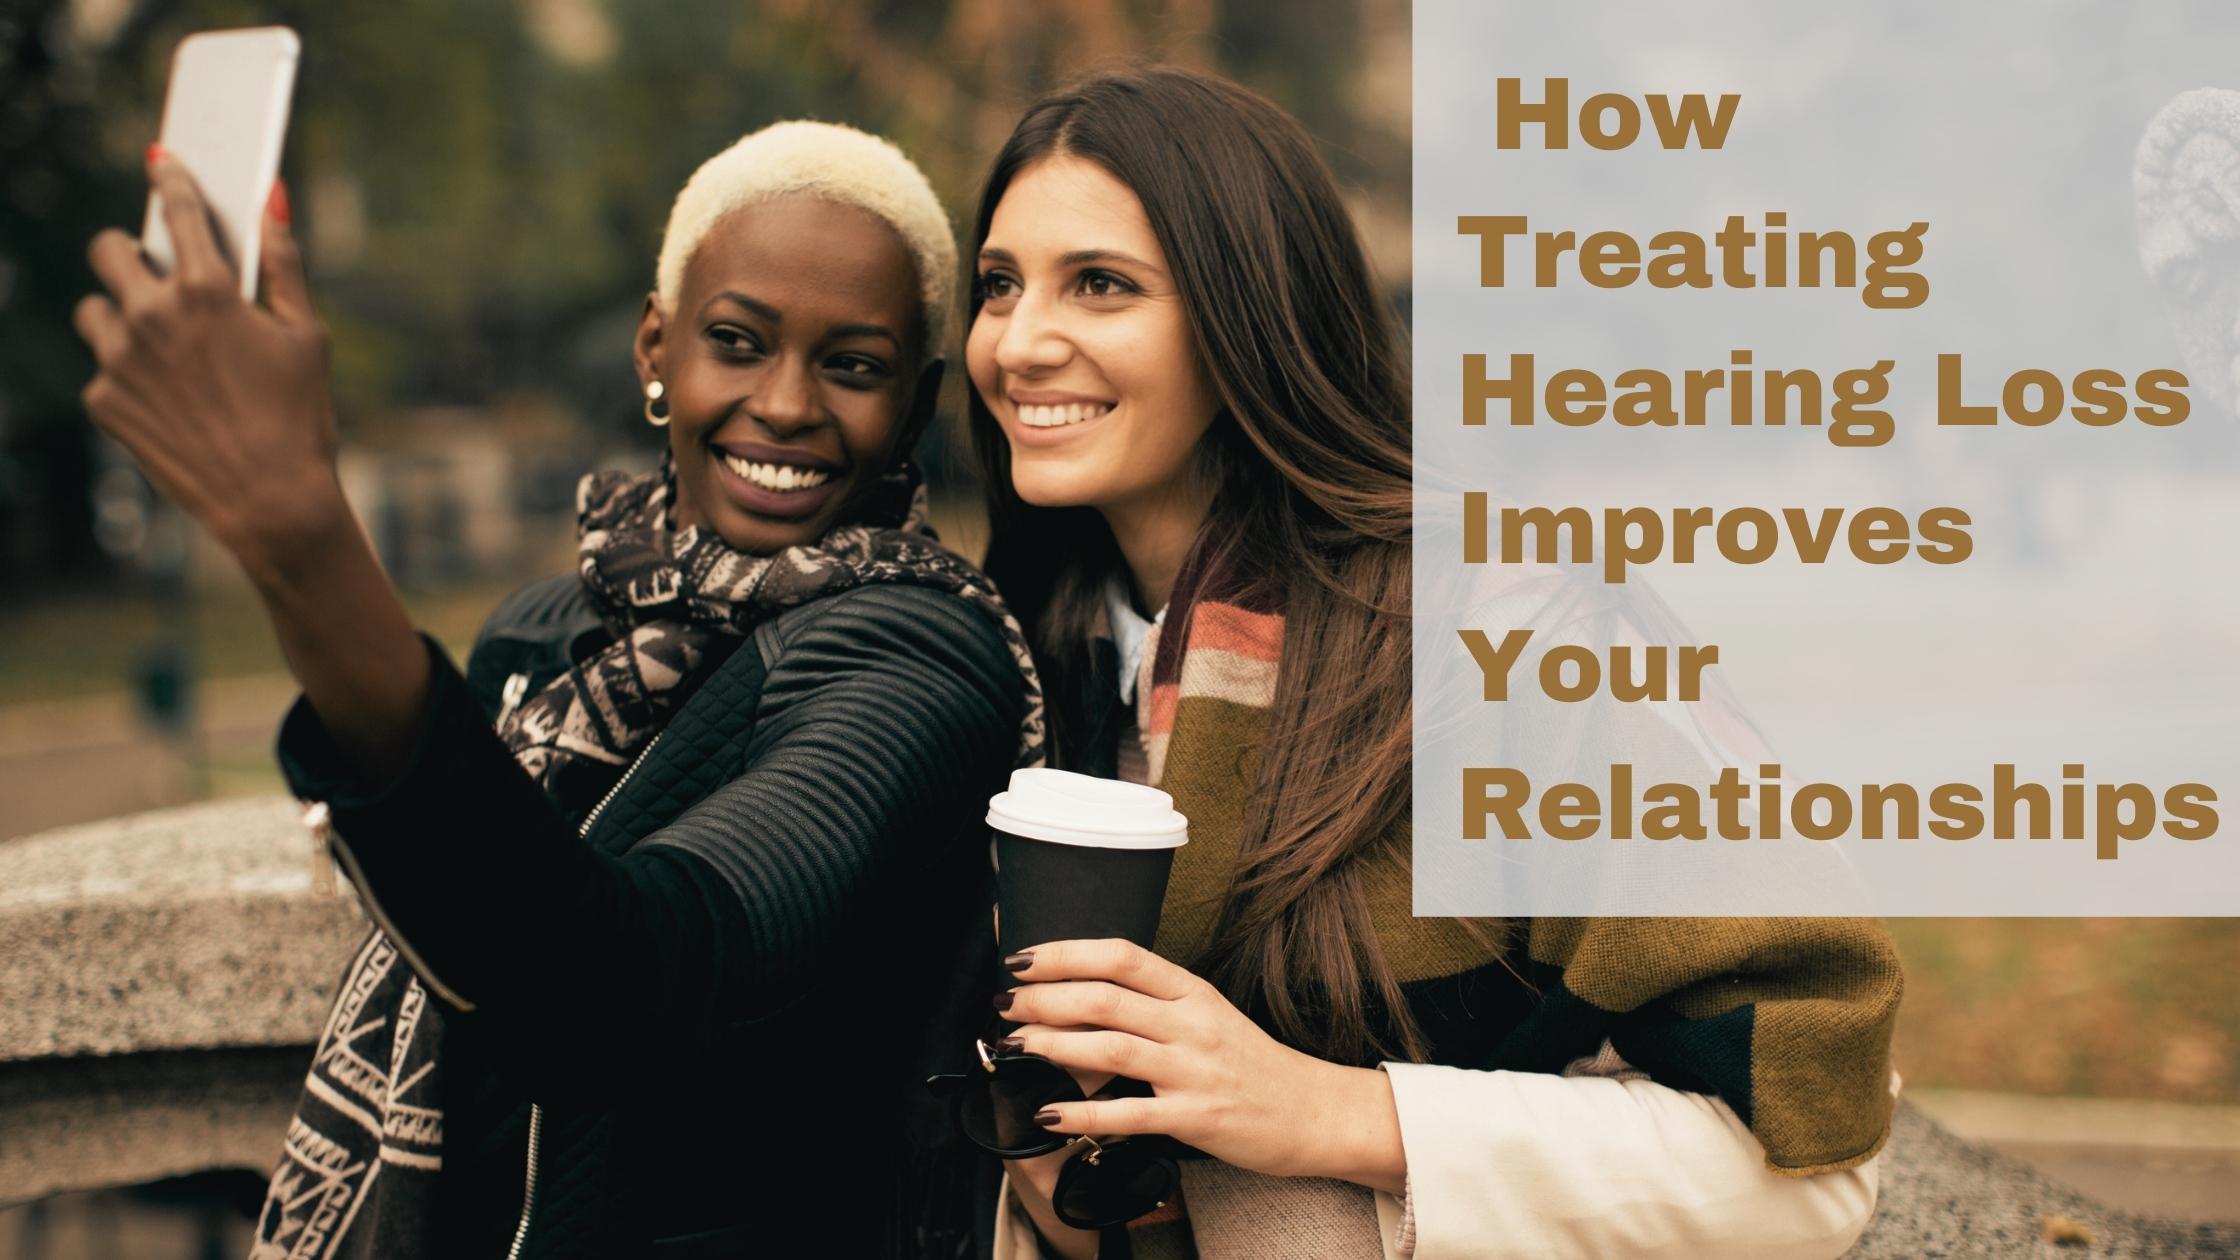 Featured image for “How Treating Hearing Loss Improves Your Relationships”